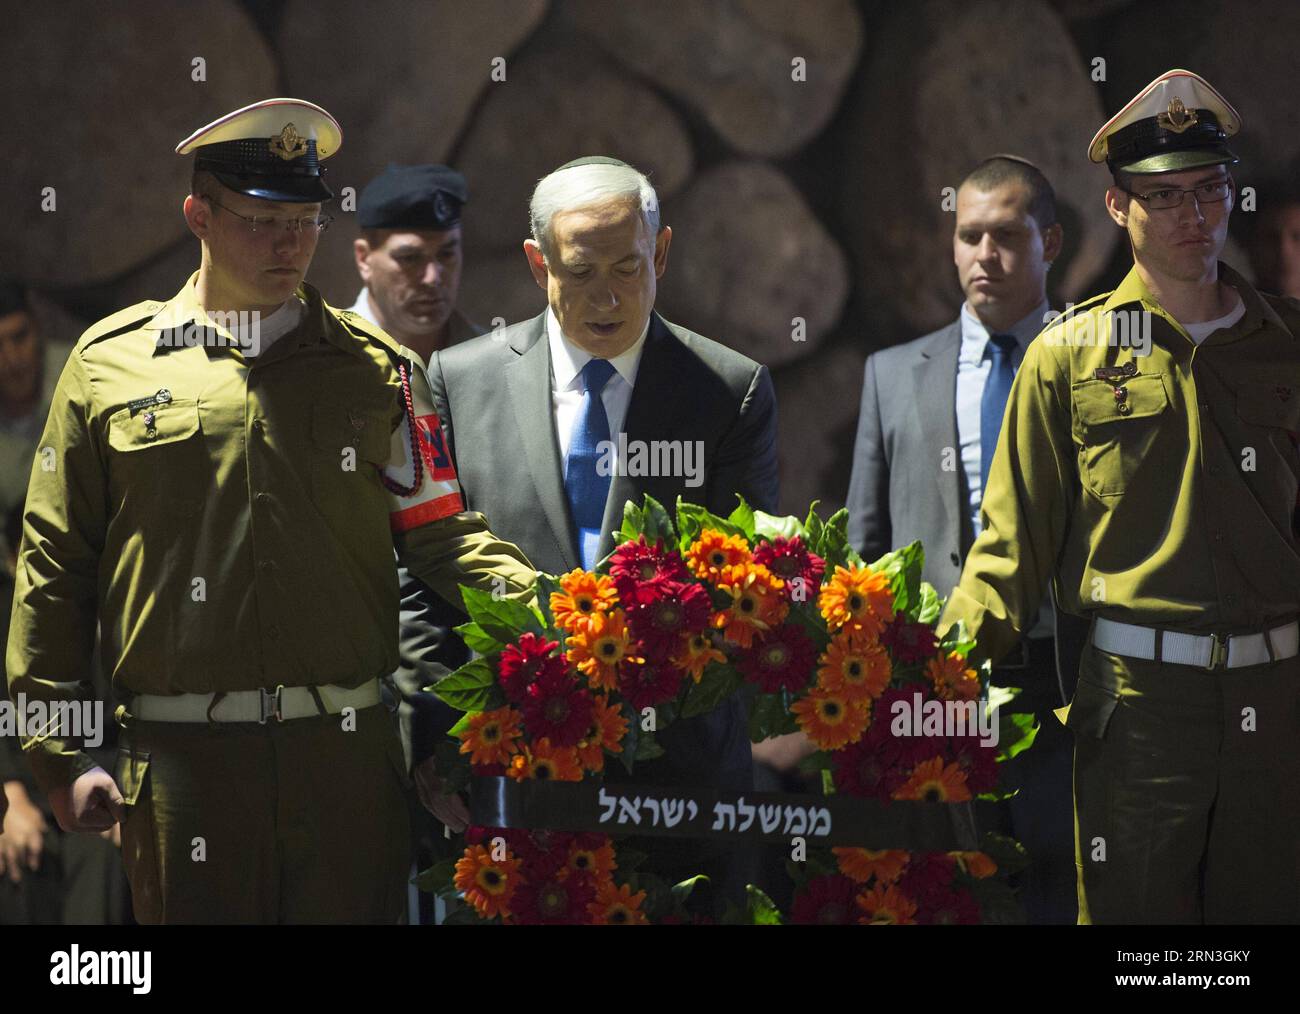 (150416) -- JERUSALEM, April 16, 2015 -- Israeli Prime Minister Benjamin Netanyahu (C) lays a wreath for holocaust victims during the Holocaust Remembrance Day at the Yad Vashem Holocaust Memorial Museum in Jerusalem, on April 16, 2015. From Wednesday sunset to Thursday, Israel officially commemorated the genocide of six million Jews by Nazi Germany during the World War II. GPO/) (djj) MIDEAST-JERUSALEM-HOLOCAUST REMEMBRANCE DAY AmosxBenxGershom PUBLICATIONxNOTxINxCHN   Jerusalem April 16 2015 Israeli Prime Ministers Benjamin Netanyahu C Lays a  for Holocaust Victims during The Holocaust Remem Stock Photo